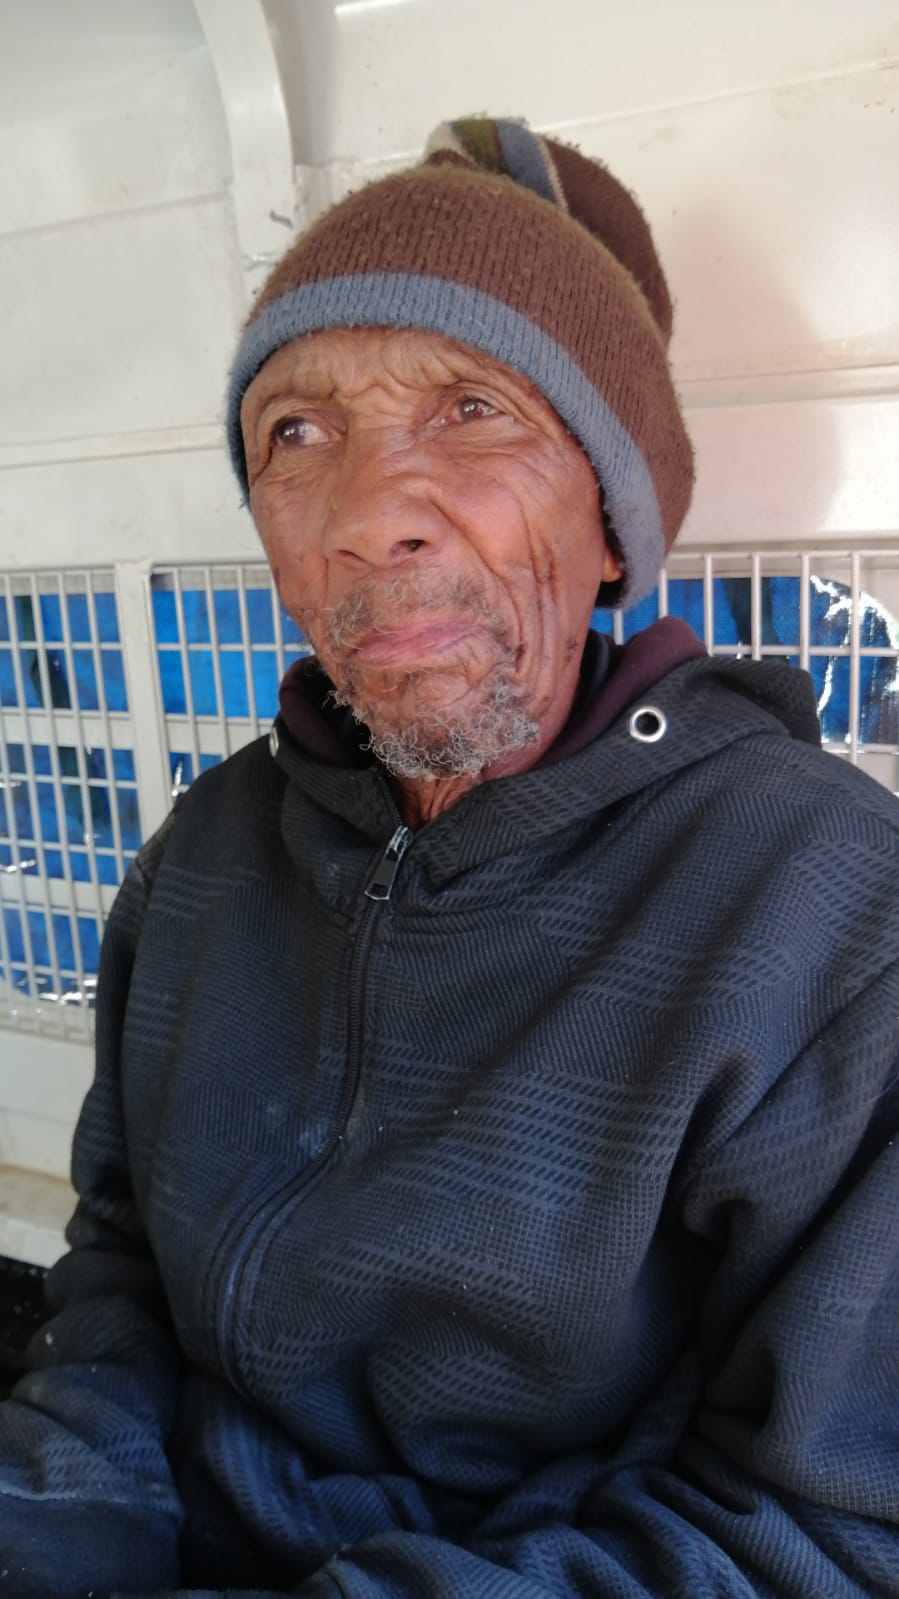 Mangaung SAPS are seeking assistance in finding the relatives of an elderly man who seems to have forgotten his way home